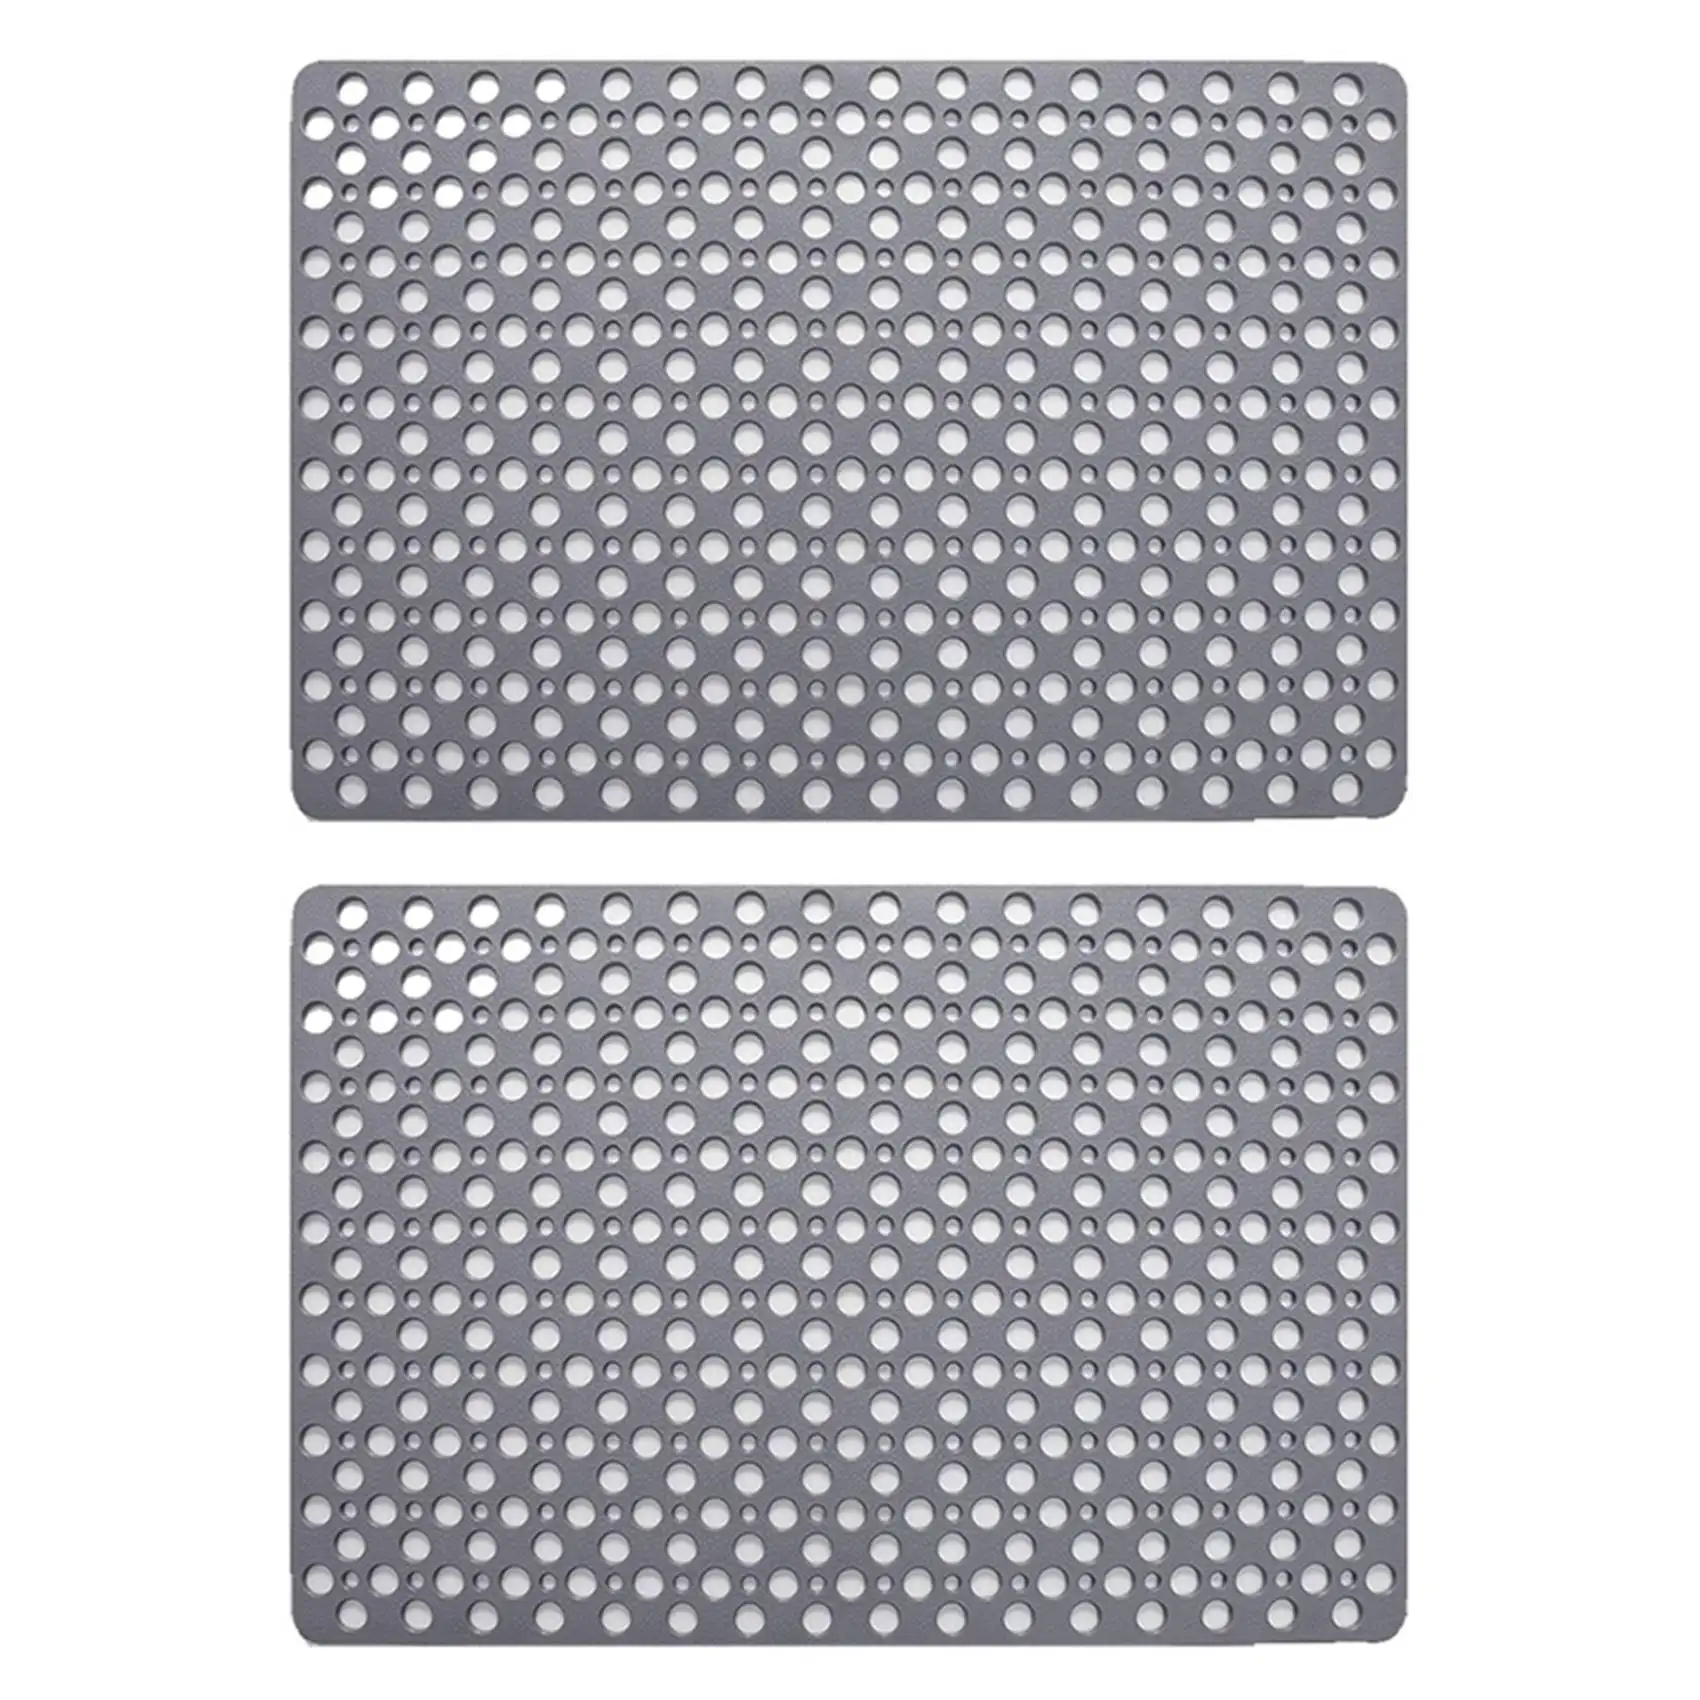 

2X Non Slip Bath Mat Anti Mould Shower Mats TPE Bathroom Bathtub Mat Floor Shower Mats Anti Slip with Suction Cups Gray